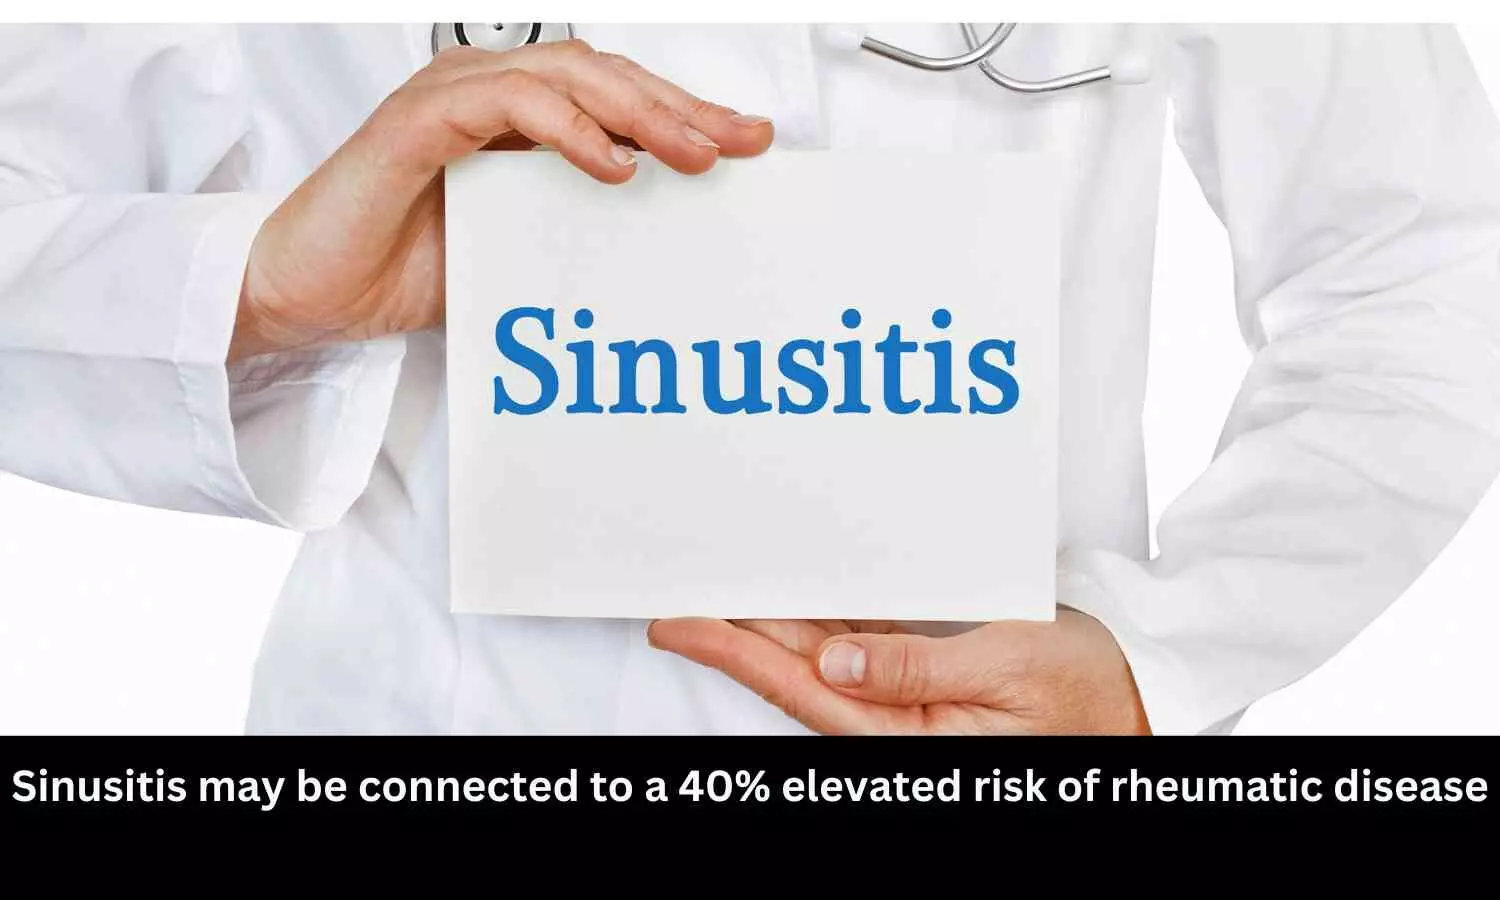 Sinusitis may be connected to a 40% elevated risk of rheumatic disease